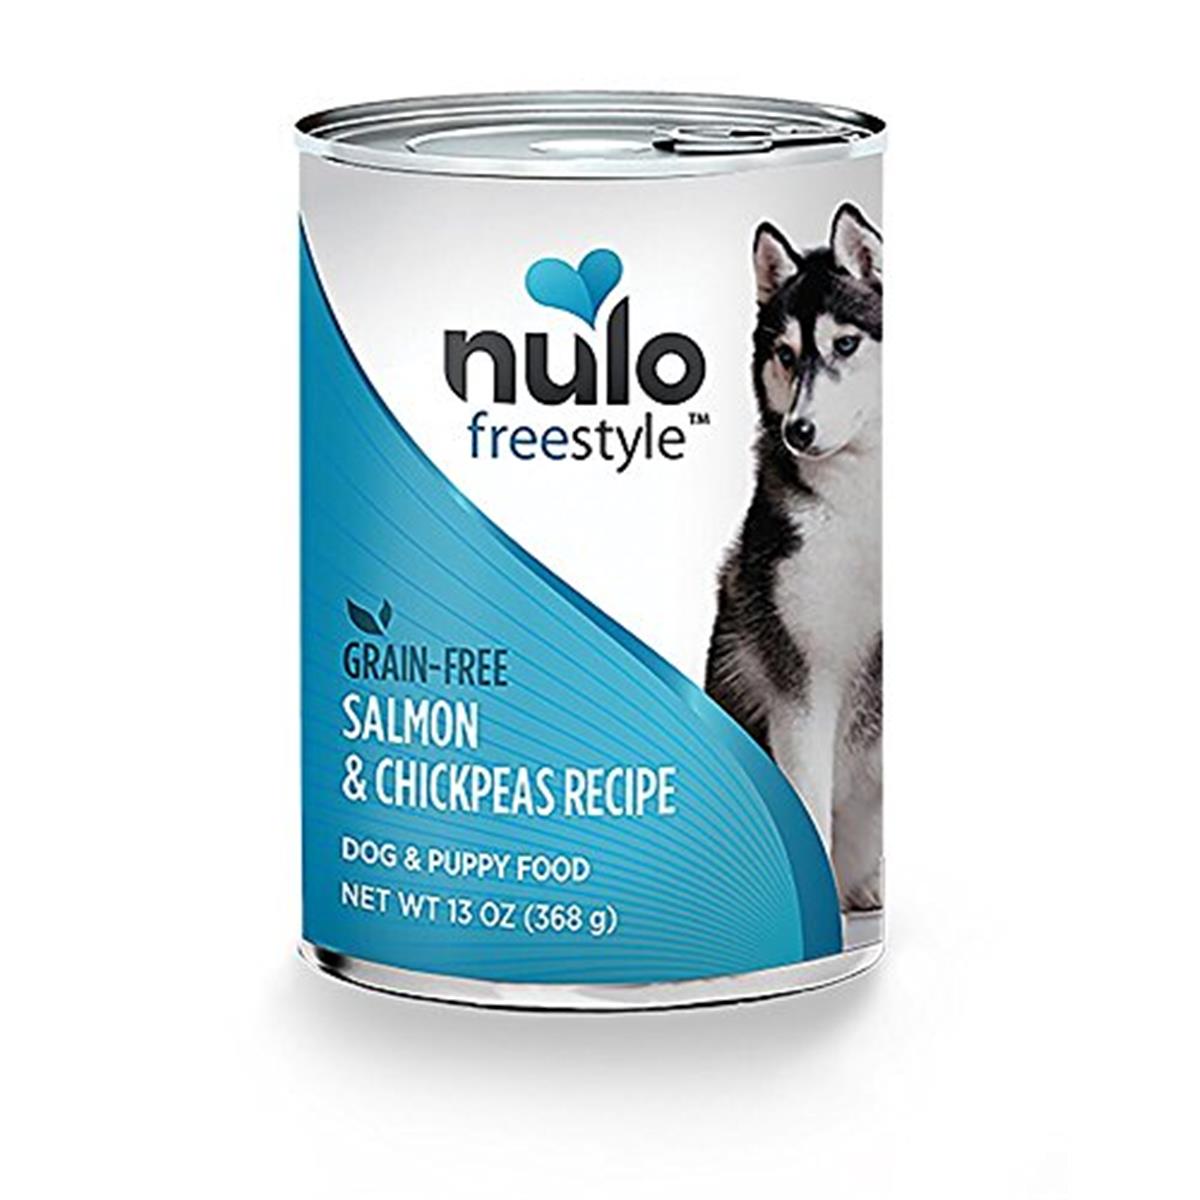 Nd02023 Can Dog Salmon Grain-free Dry Food, 13 Oz - Case Of 12